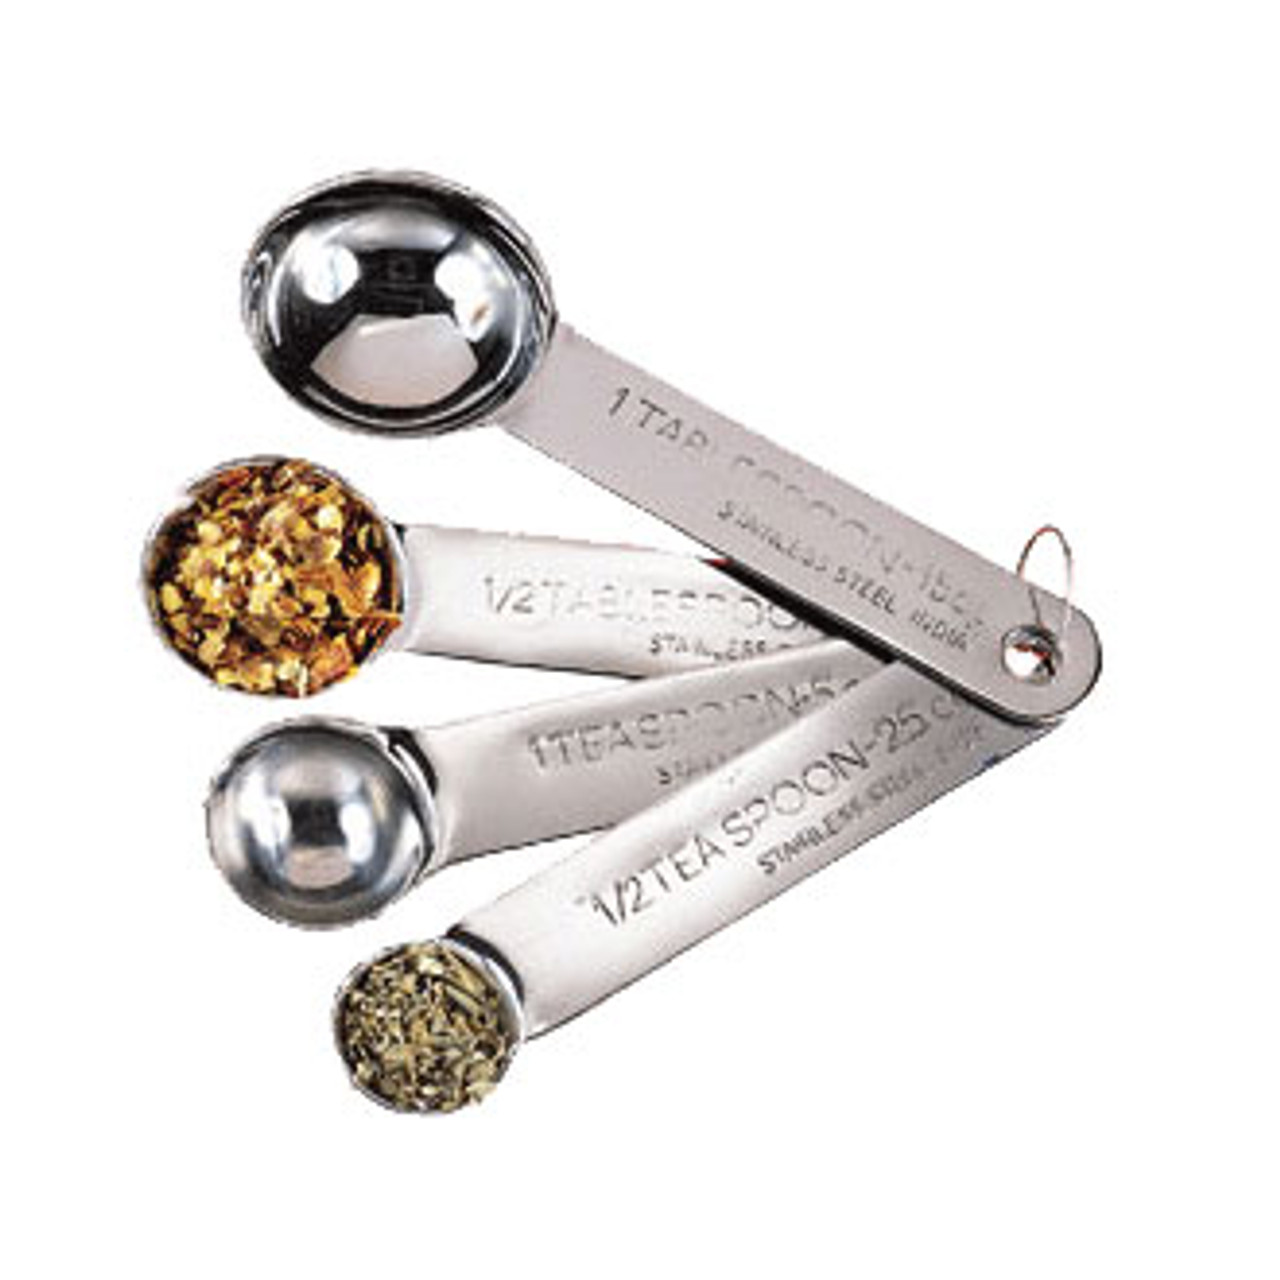 American Metalcraft Stainless Steel Round Measuring Spoons Set, 4 count